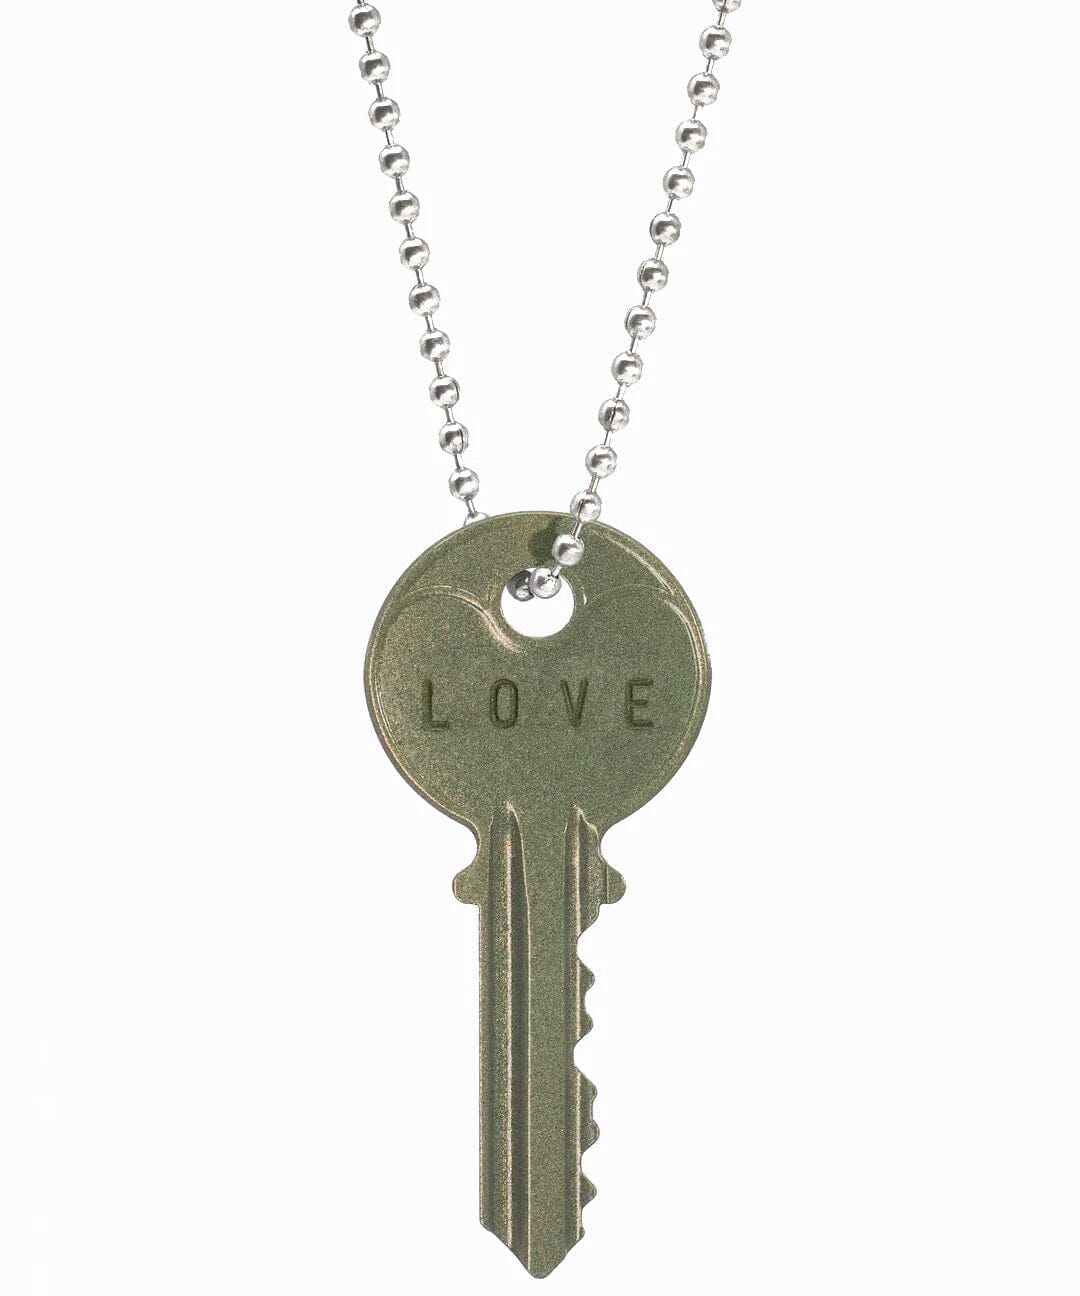 N - Sage Classic Ball Chain Key Necklace Necklaces The Giving Keys 